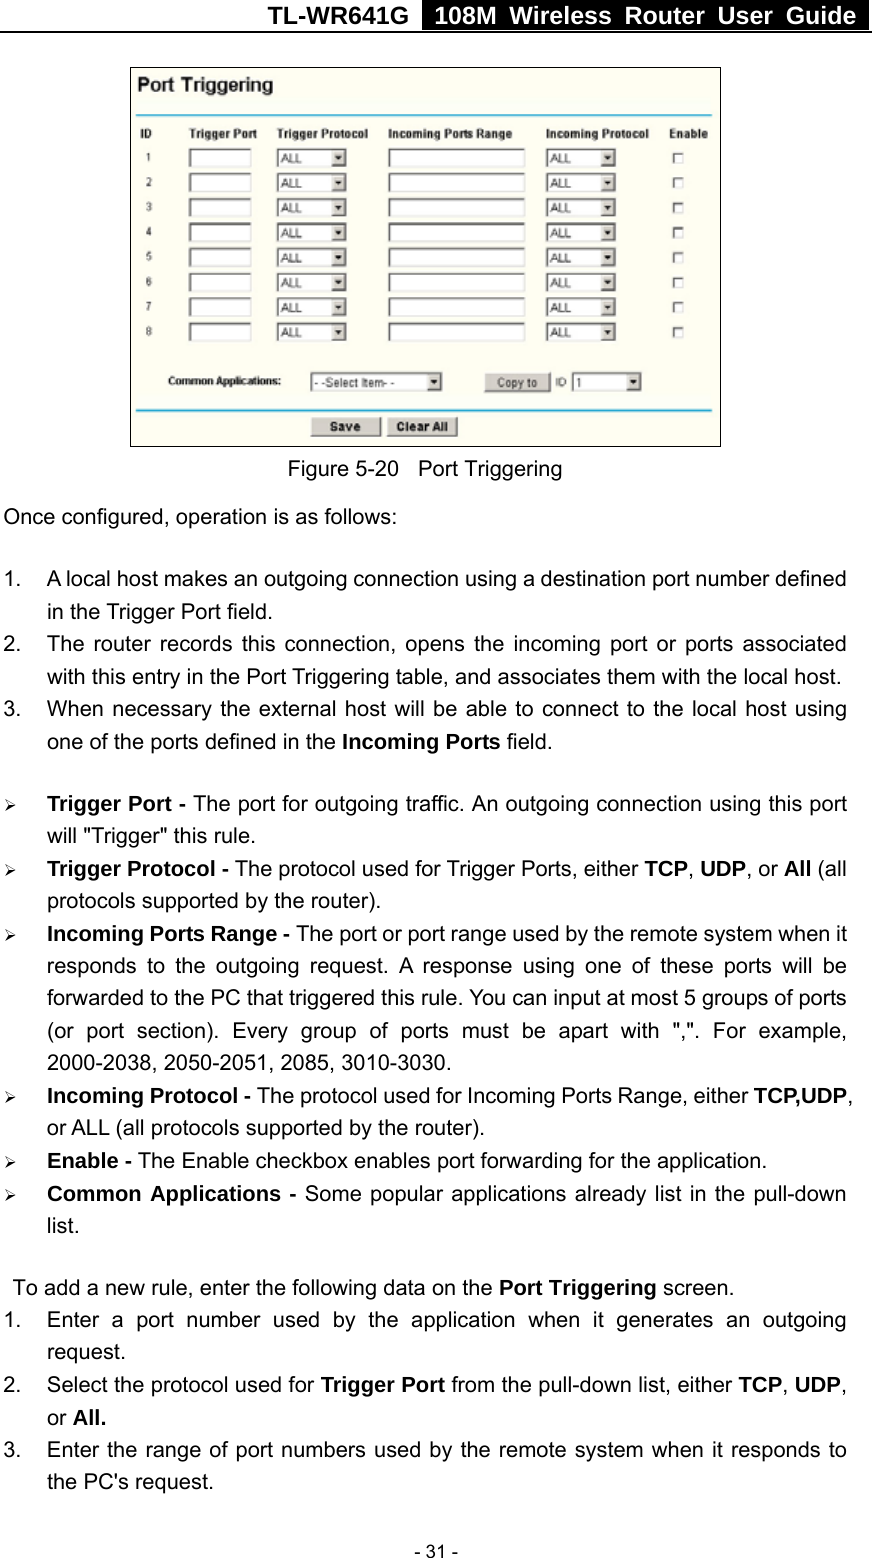 TL-WR641G   108M Wireless Router User Guide   - 31 - Figure 5-20  Port Triggering Once configured, operation is as follows:   1.  A local host makes an outgoing connection using a destination port number defined in the Trigger Port field.   2.  The router records this connection, opens the incoming port or ports associated with this entry in the Port Triggering table, and associates them with the local host.   3.  When necessary the external host will be able to connect to the local host using one of the ports defined in the Incoming Ports field. ¾ Trigger Port - The port for outgoing traffic. An outgoing connection using this port will &quot;Trigger&quot; this rule. ¾ Trigger Protocol - The protocol used for Trigger Ports, either TCP, UDP, or All (all protocols supported by the router). ¾ Incoming Ports Range - The port or port range used by the remote system when it responds to the outgoing request. A response using one of these ports will be forwarded to the PC that triggered this rule. You can input at most 5 groups of ports (or port section). Every group of ports must be apart with &quot;,&quot;. For example, 2000-2038, 2050-2051, 2085, 3010-3030. ¾ Incoming Protocol - The protocol used for Incoming Ports Range, either TCP,UDP, or ALL (all protocols supported by the router). ¾ Enable - The Enable checkbox enables port forwarding for the application. ¾ Common Applications - Some popular applications already list in the pull-down list. To add a new rule, enter the following data on the Port Triggering screen.   1.  Enter a port number used by the application when it generates an outgoing request.   2.  Select the protocol used for Trigger Port from the pull-down list, either TCP, UDP, or All. 3.  Enter the range of port numbers used by the remote system when it responds to the PC&apos;s request. 